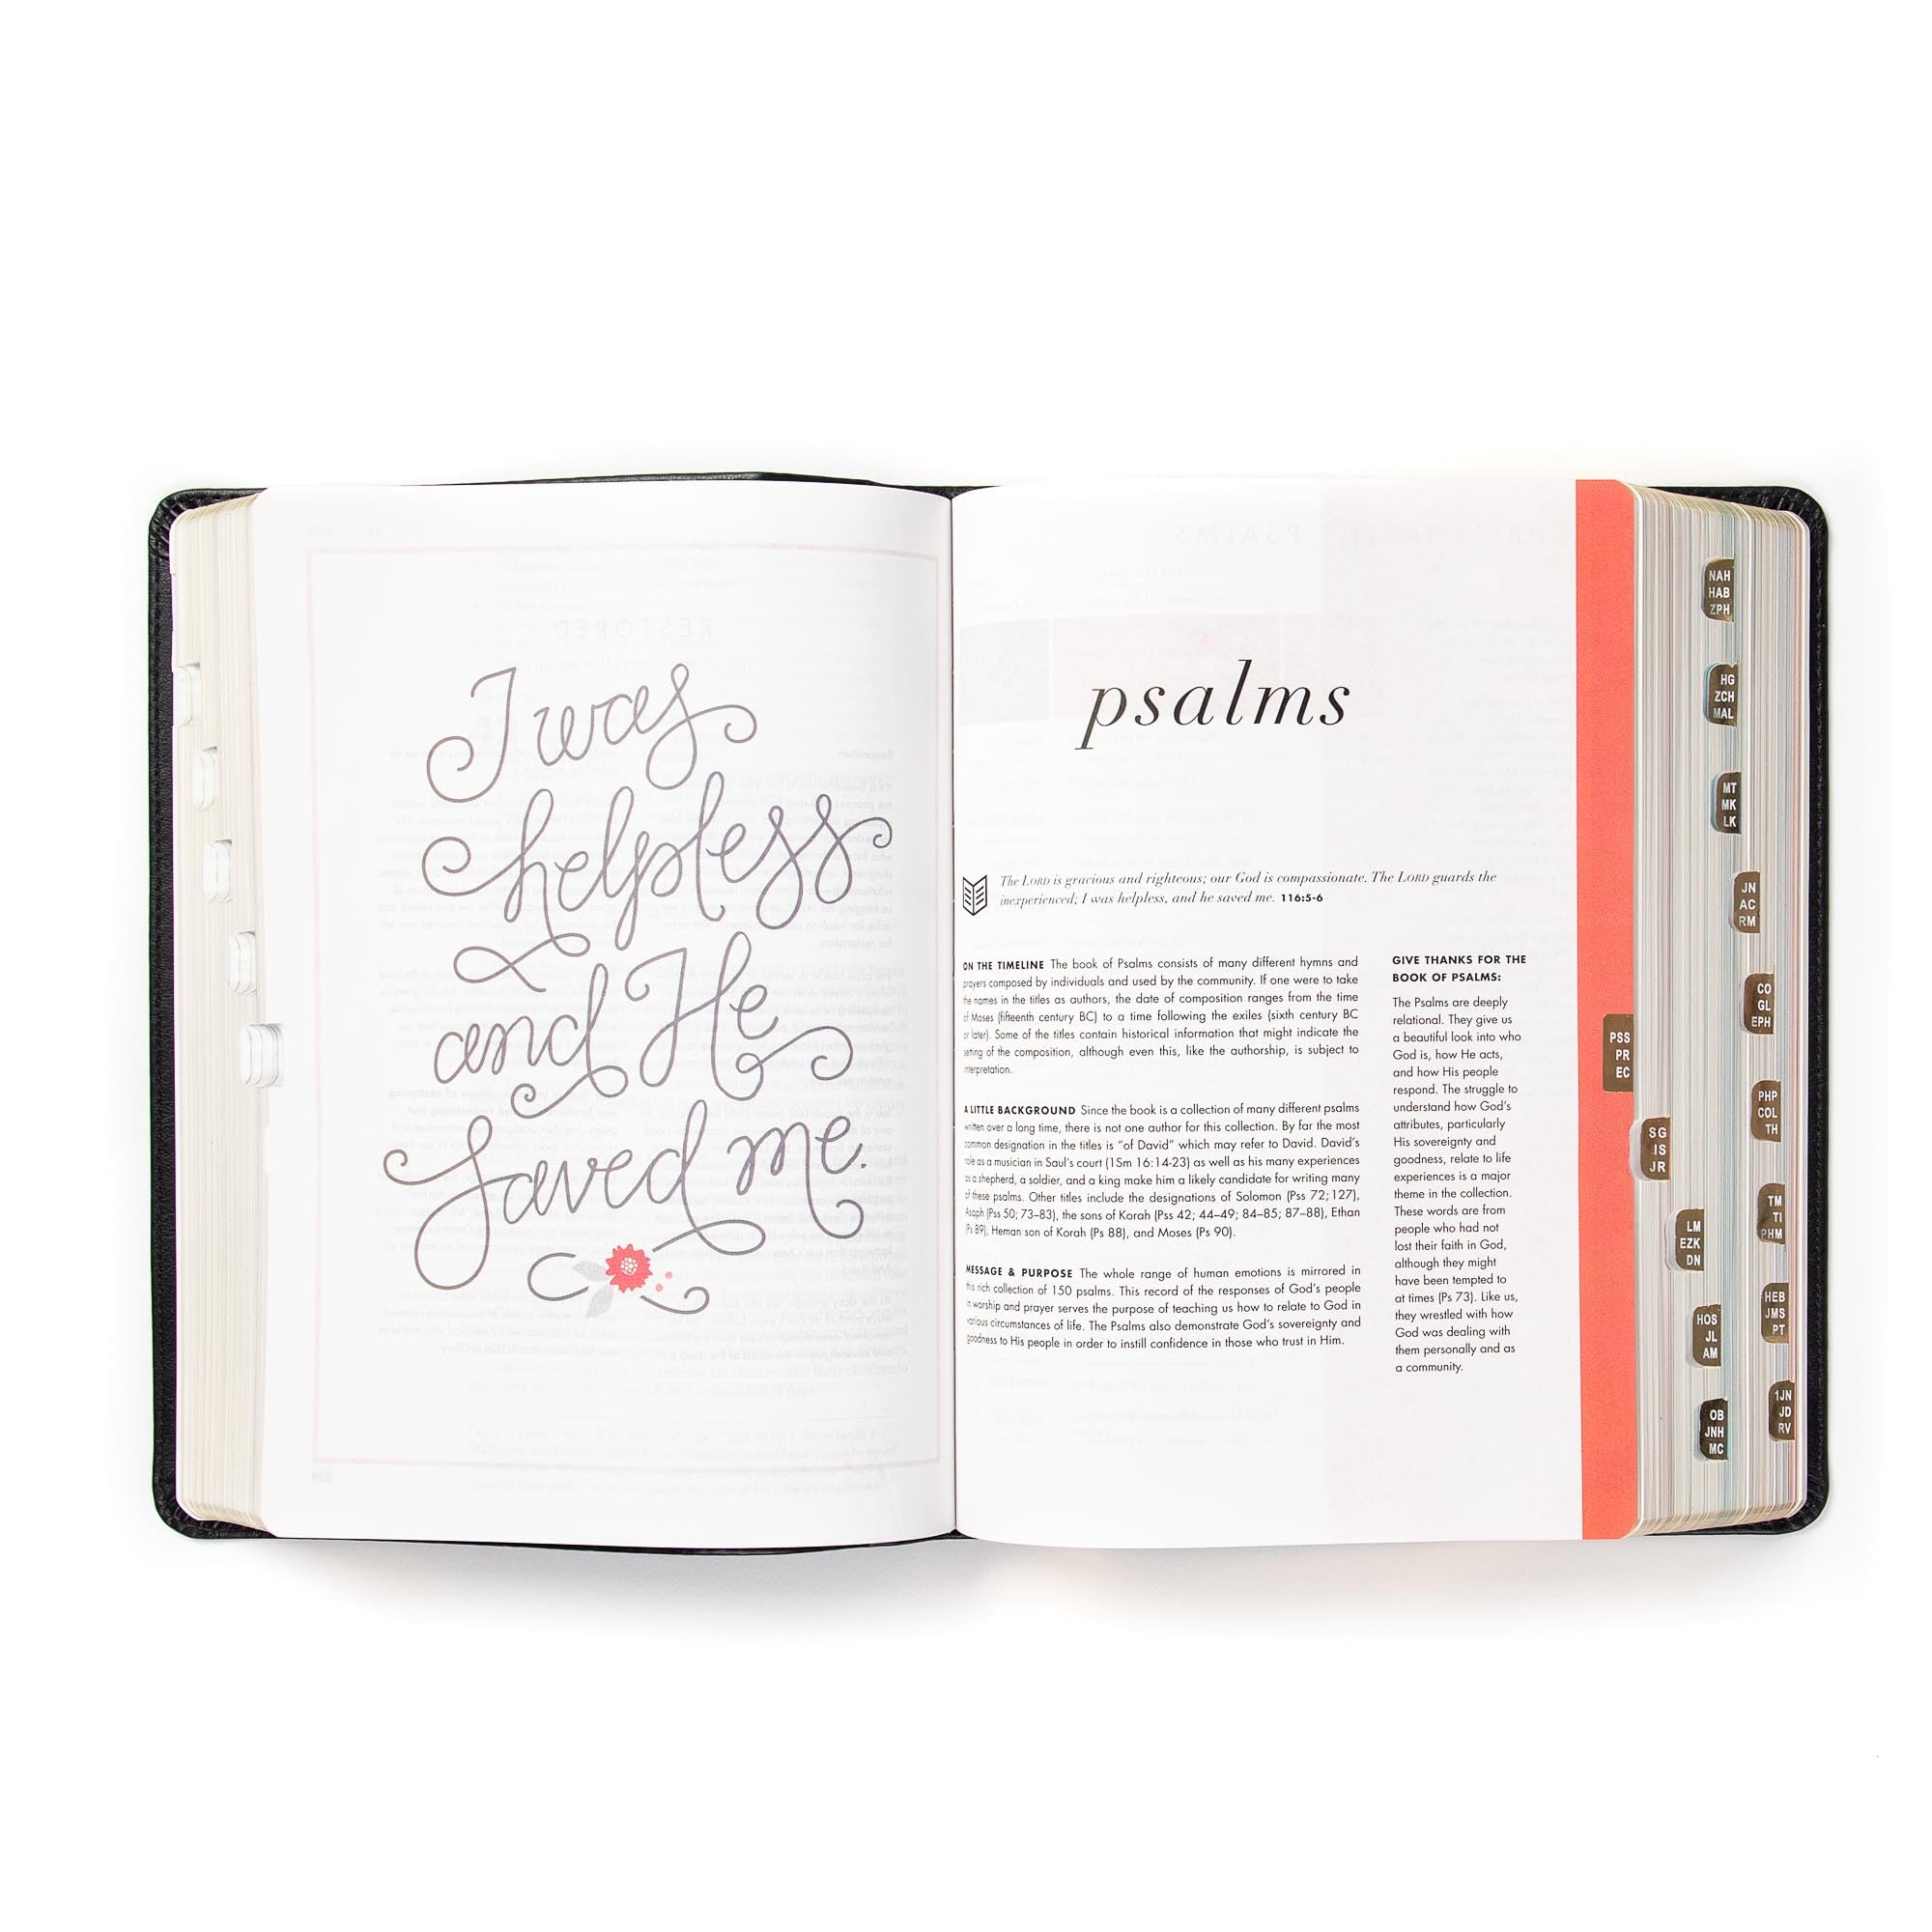 CSB She Reads Truth Bible, Black LeatherTouch Indexed, Black Letter, Full-Color Design, Wide Margins, Journaling Space, Devotionals, Reading Plans, Single-Column, Easy-to-Read Bible Serif Type